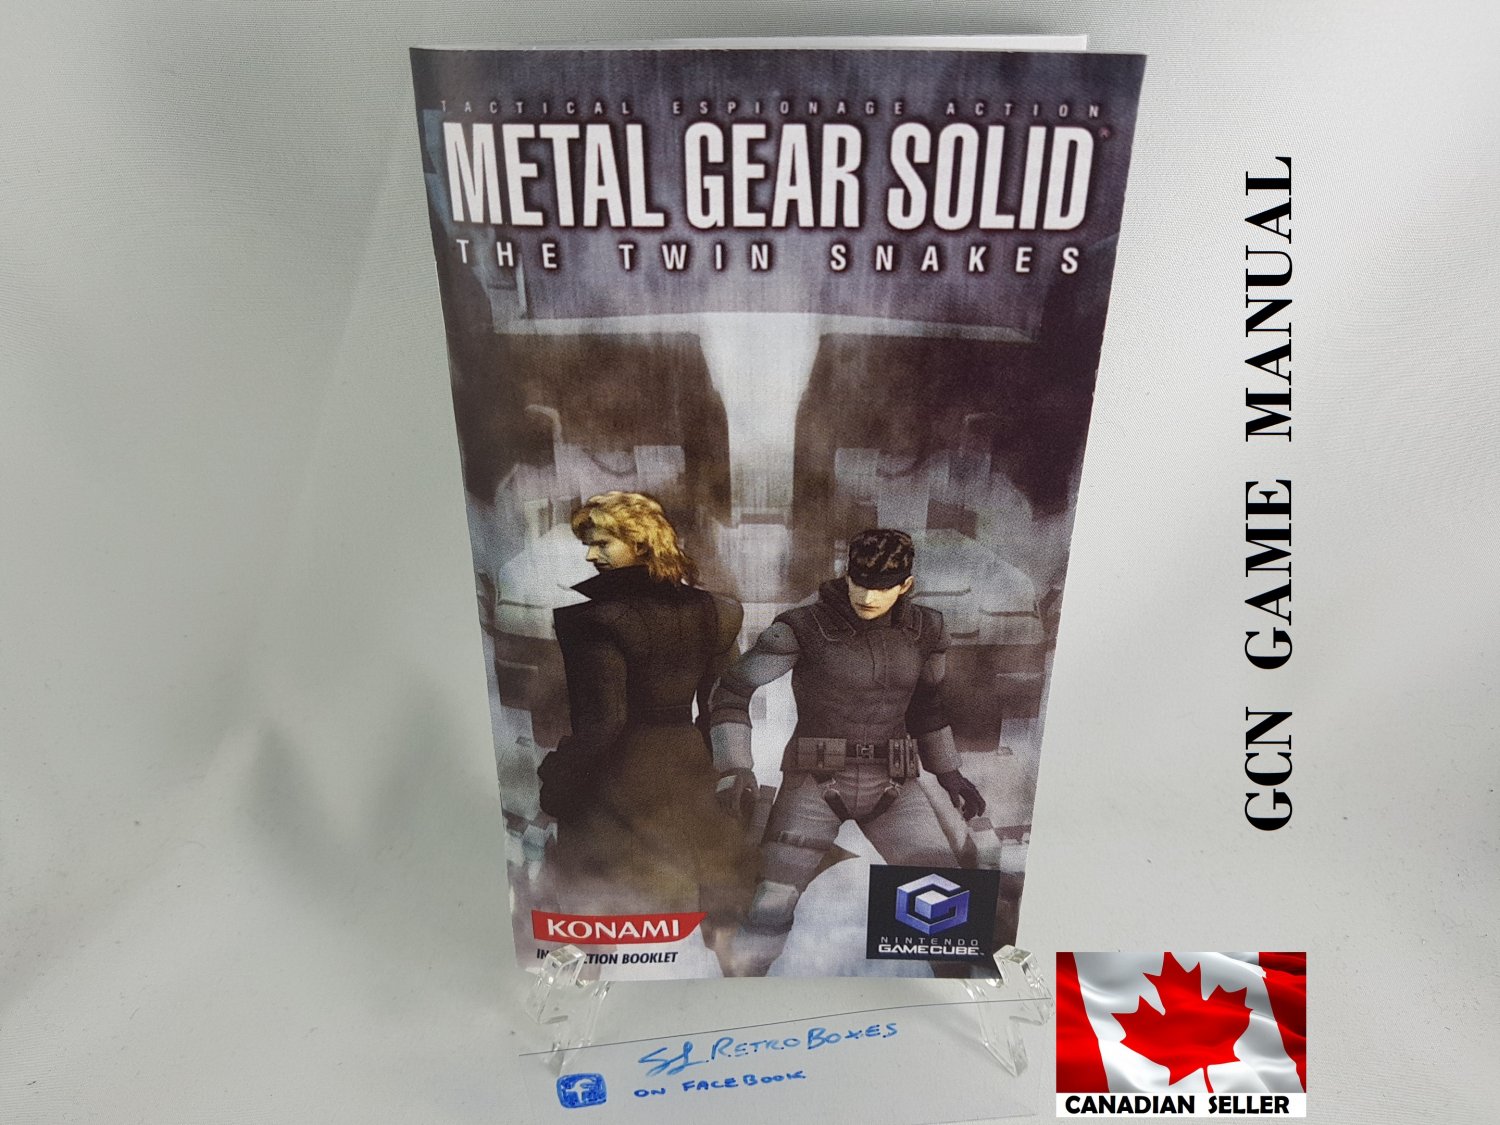 MANUAL GCN - METAL GEAR SOLID TWIN SNAKES - Nintendo Gamecube Replacement Instruction Booklet